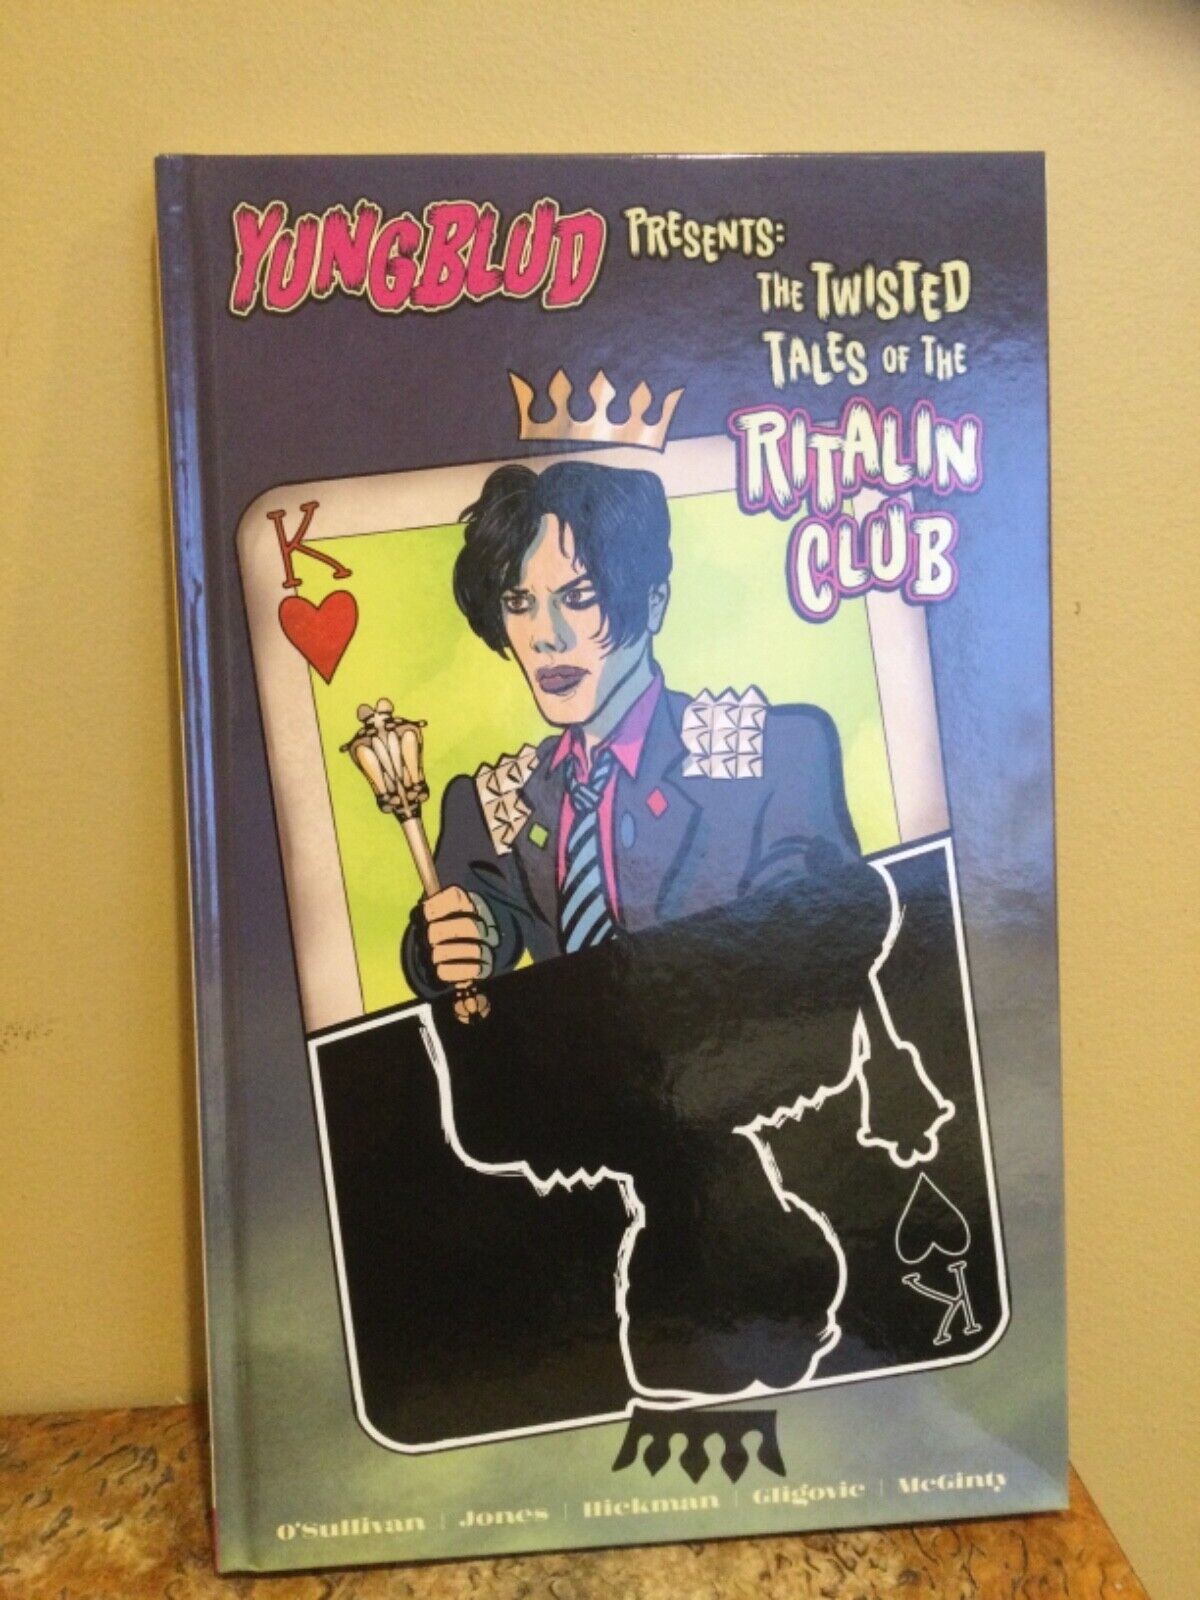 Yungblud Presents: The Twisted Tales of the Ritalin Club SIGNED Hardcover Book